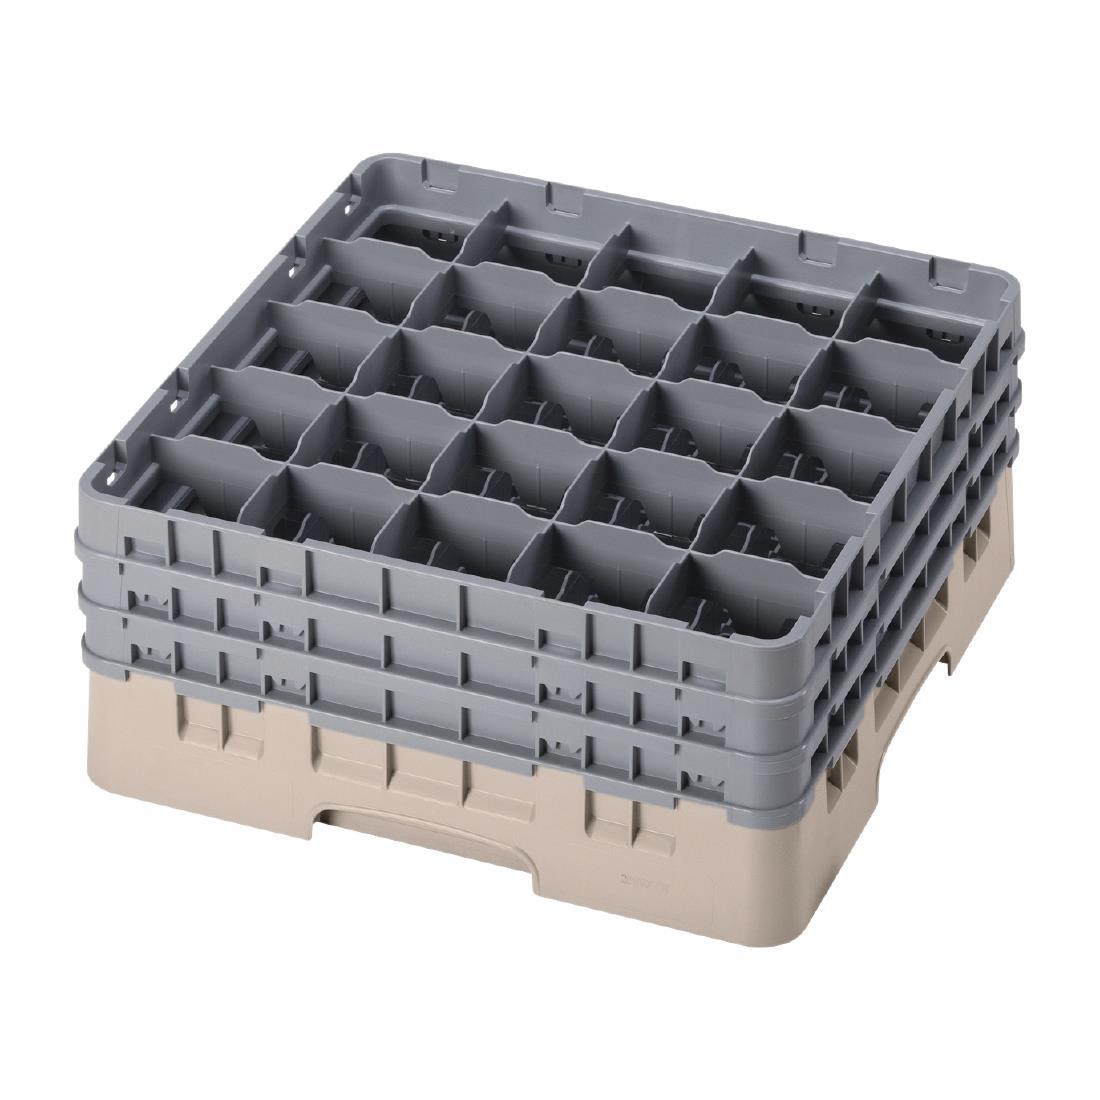 Cambro Camrack Beige 25 Compartments Max Glass Height 196mm - FD072  - 1